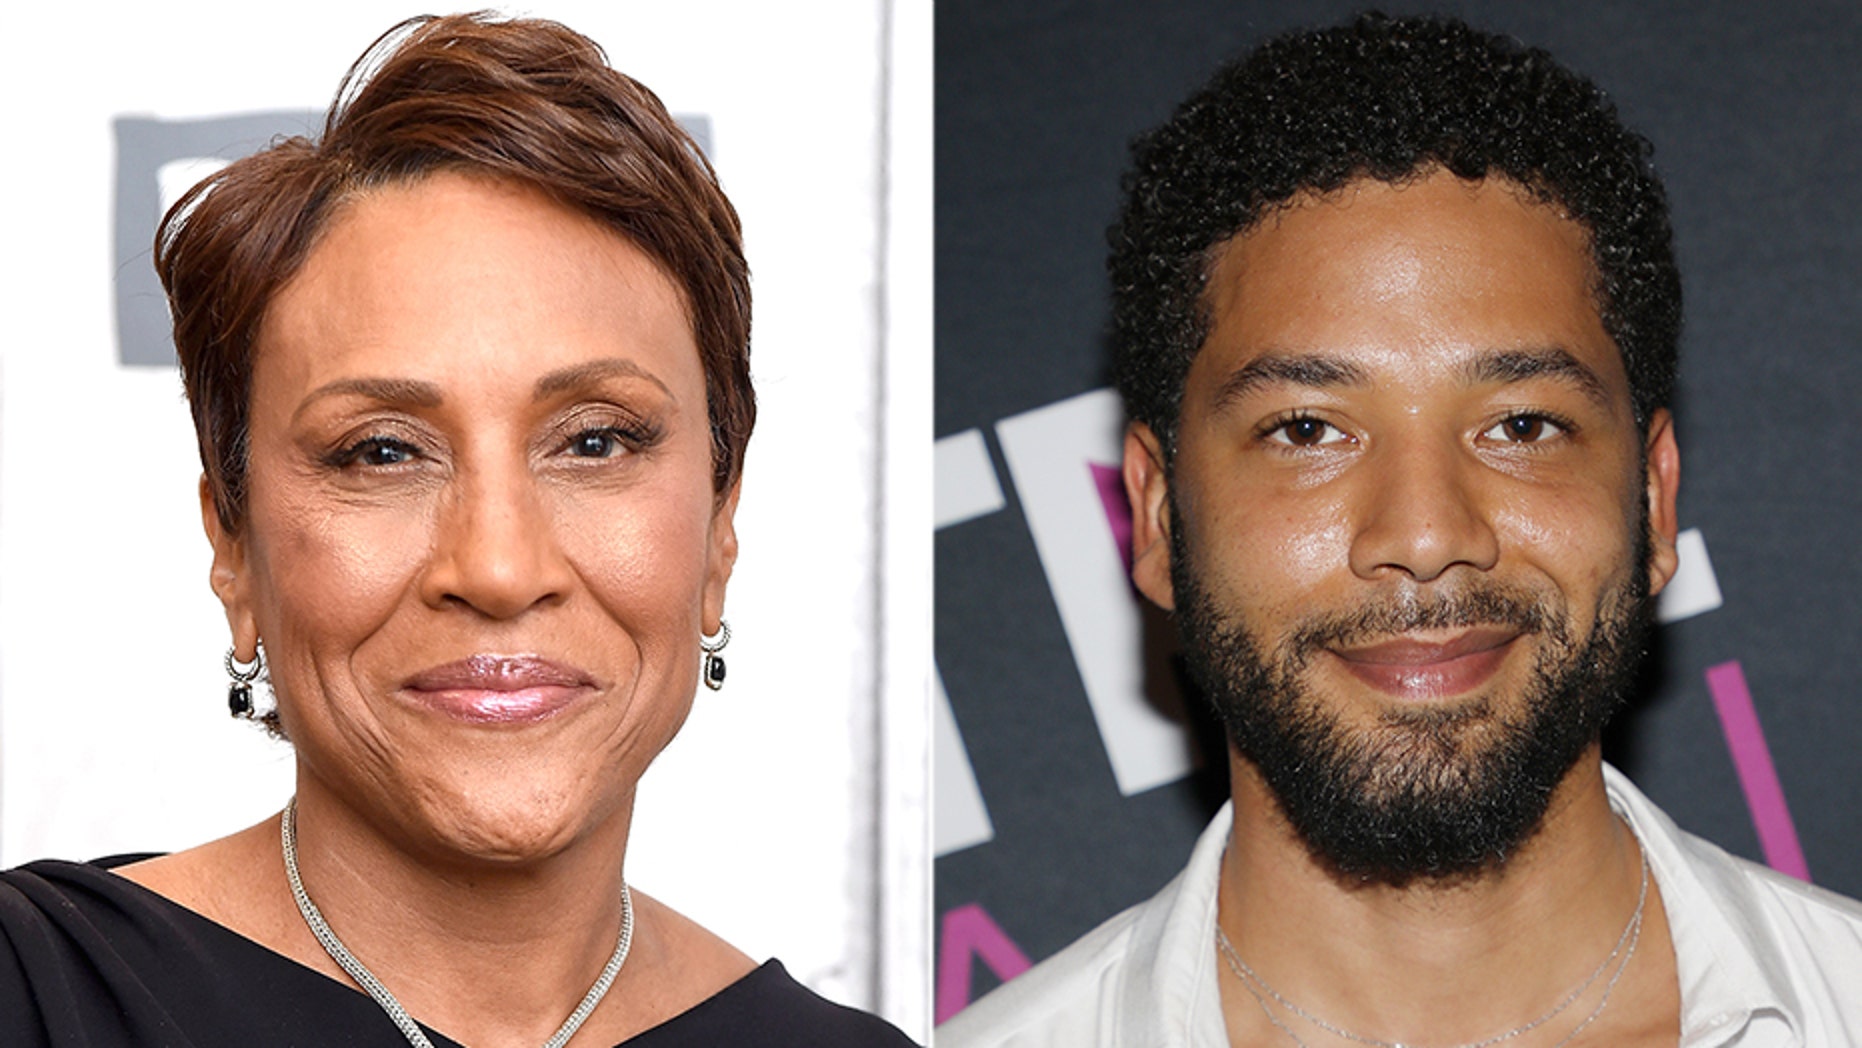 The co-host of "Good Morning America", Robin Roberts, has been accused of not doing anything silly to Jussie Smollett.